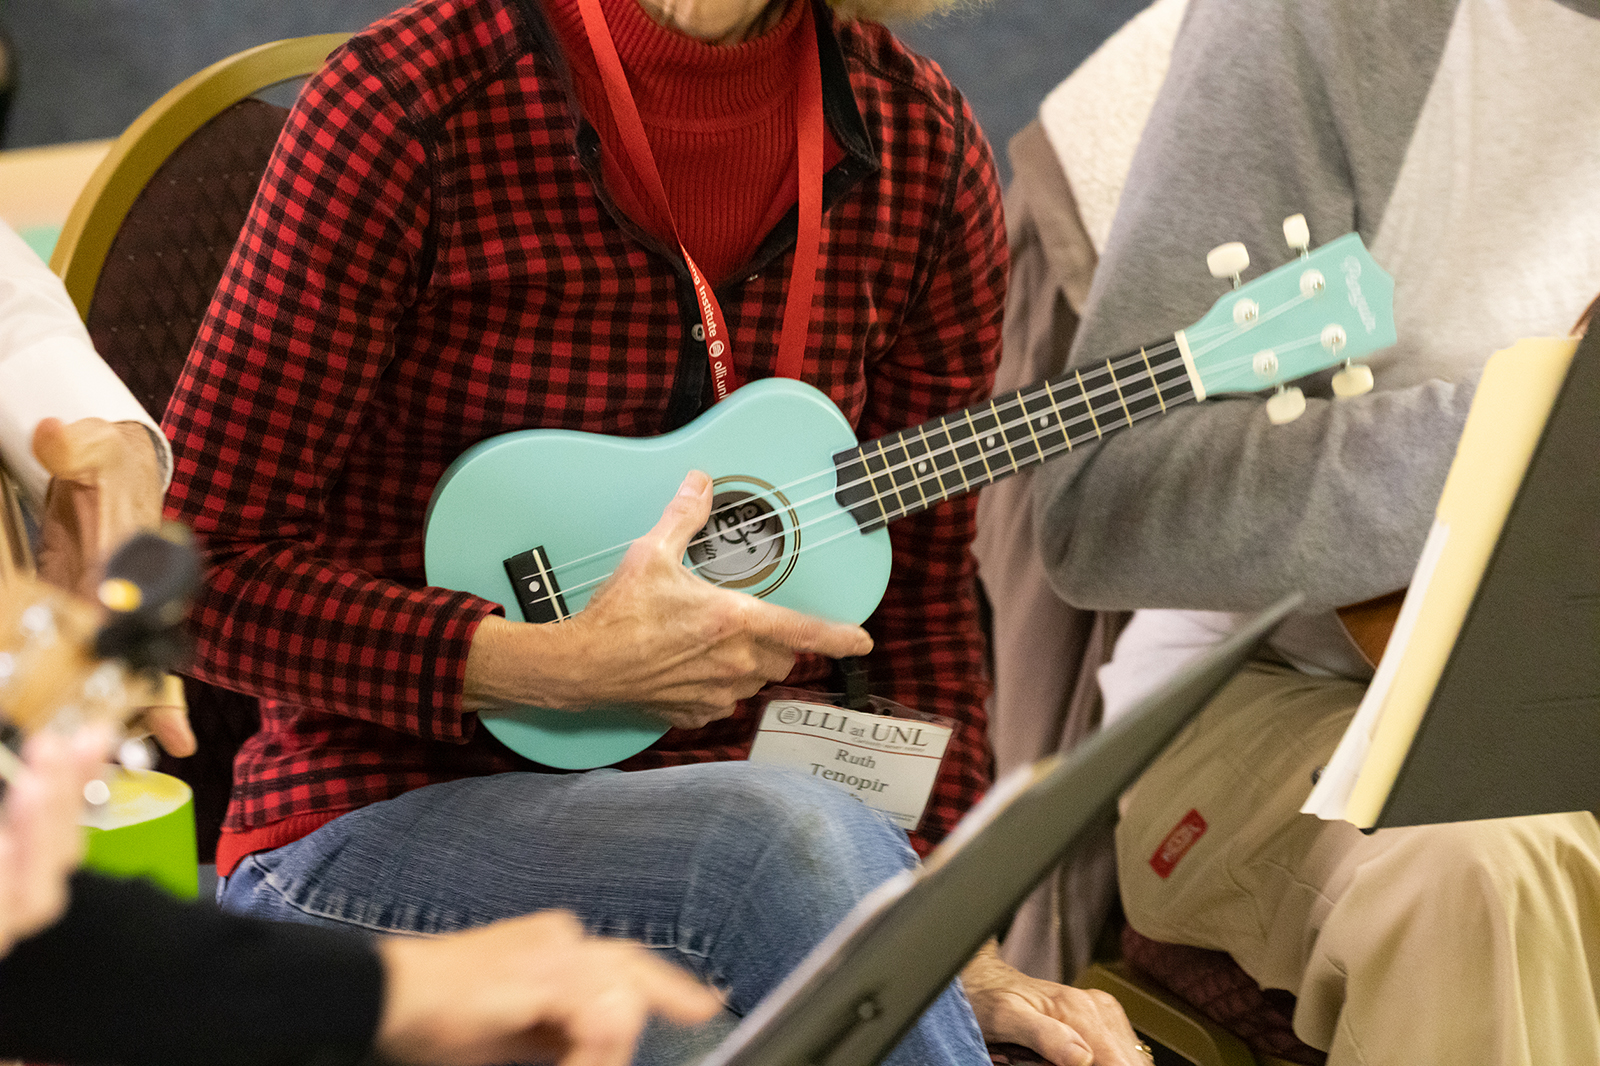 Share your interest in the ukulele with others.